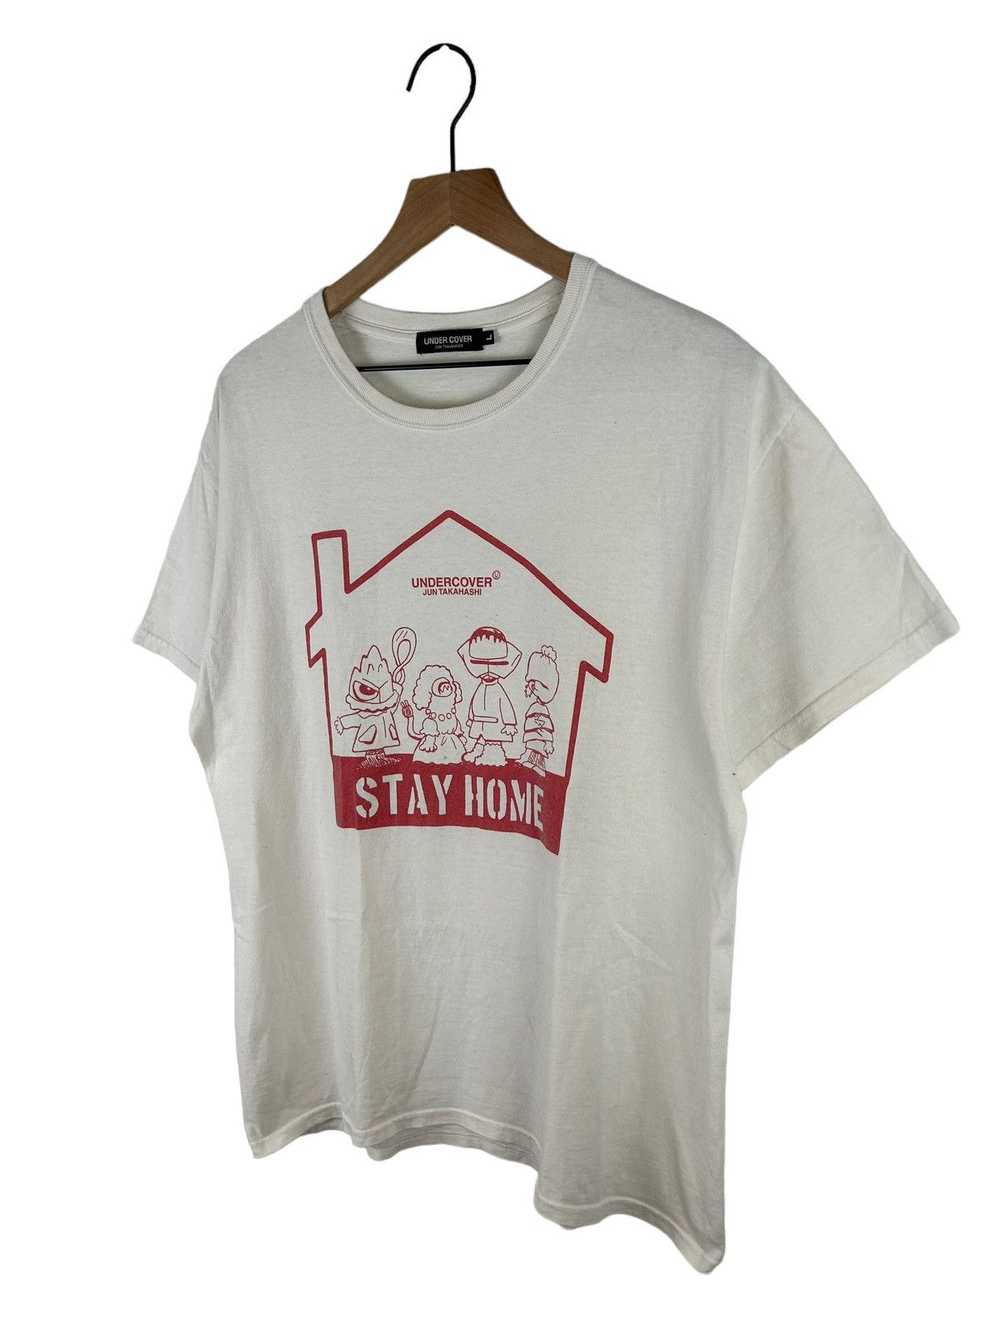 Undercover Undercover Stay Home Print T-Shirt - image 2